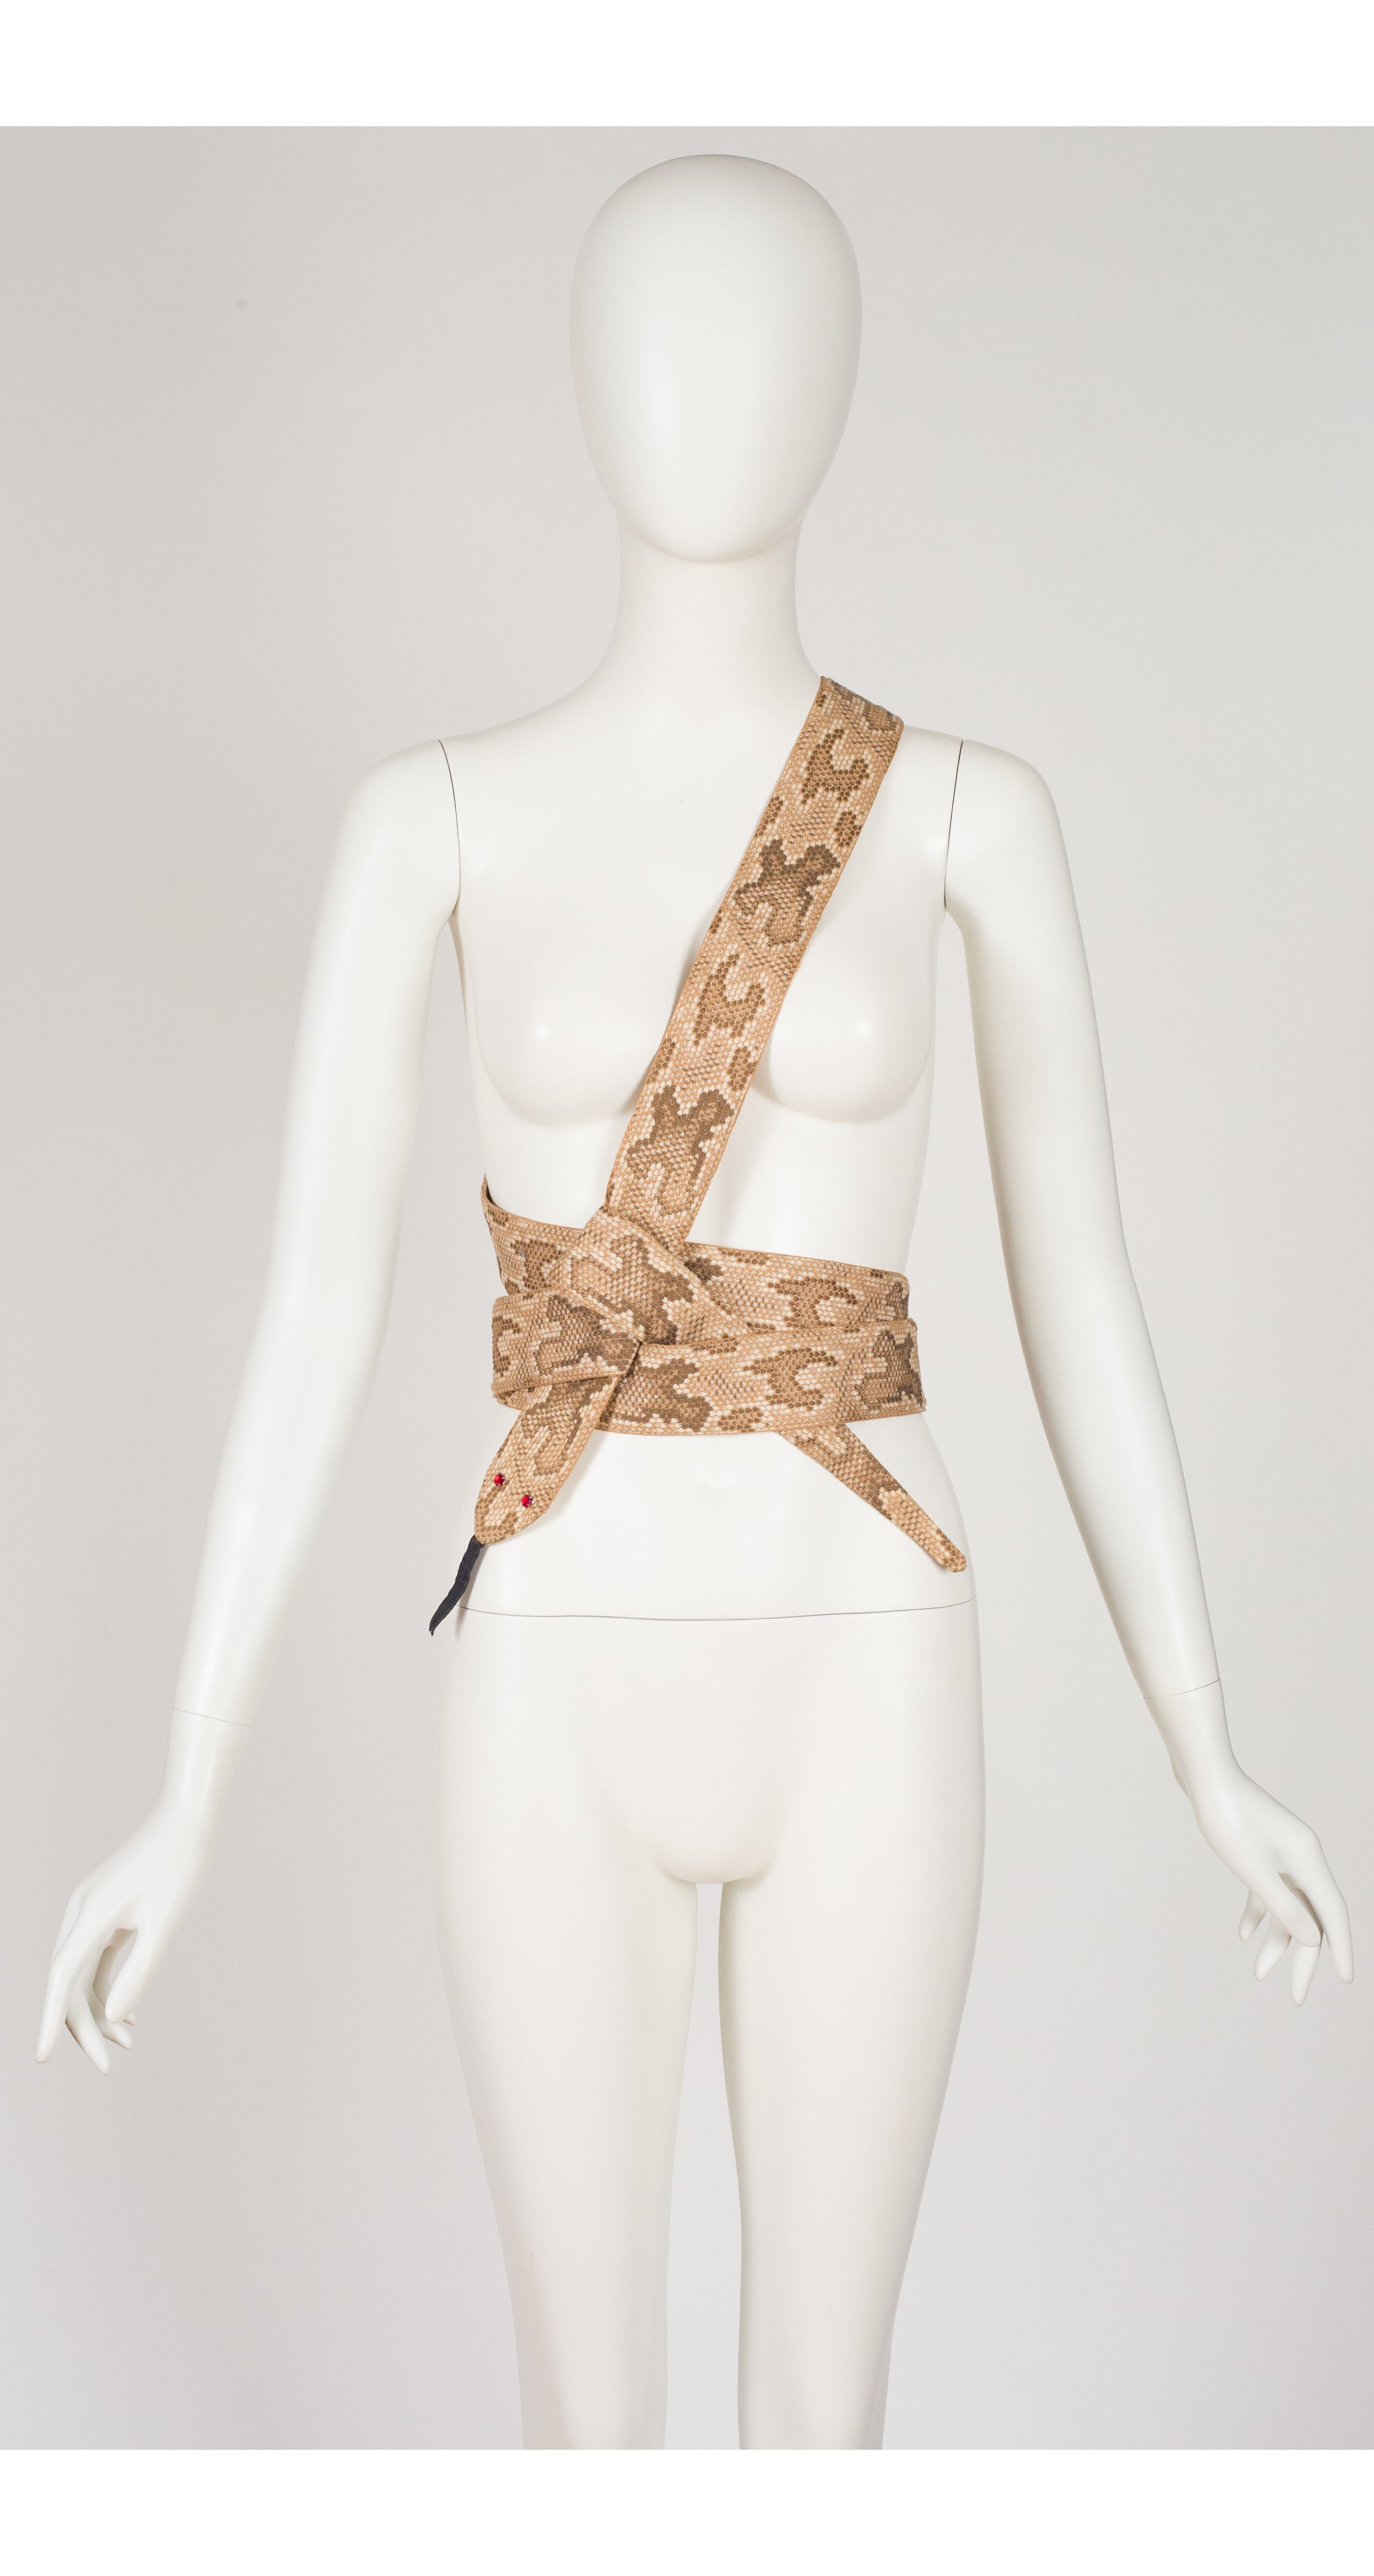 1983-84 F/W Runway 110" Cotton and Leather Python Print Figural Belt